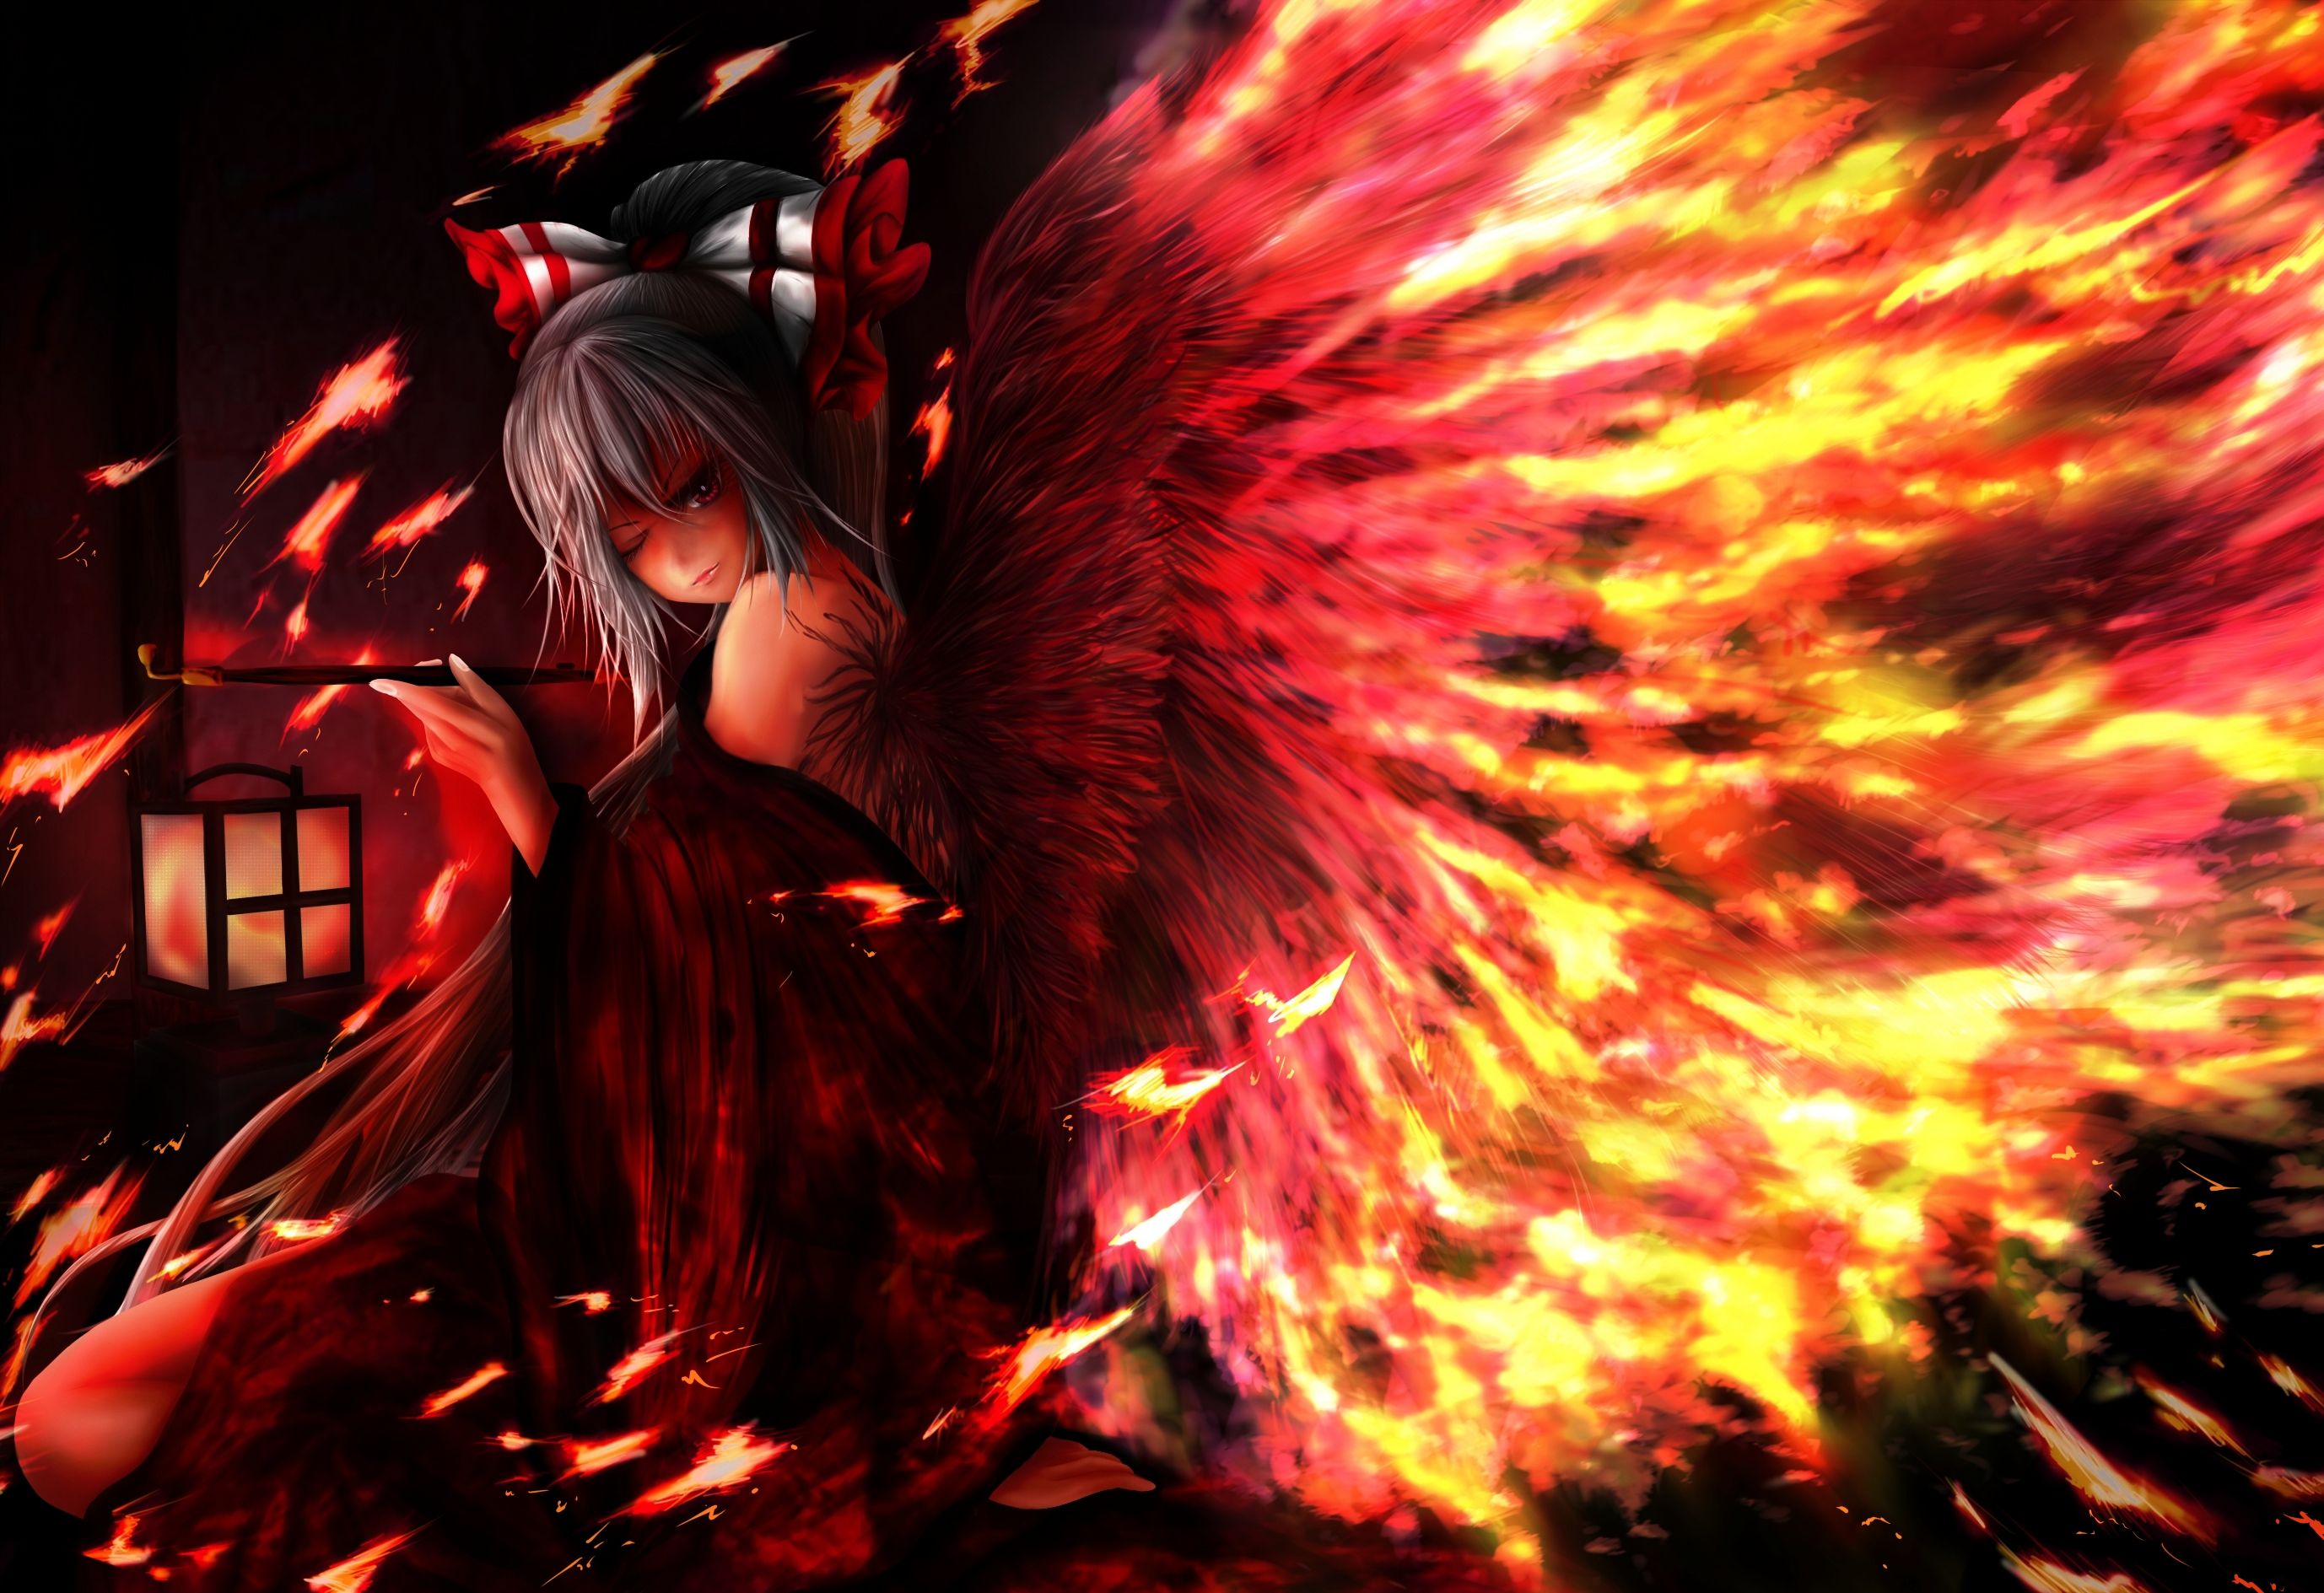 Touhou fantasy vector art angels fire wings girl gothic dark